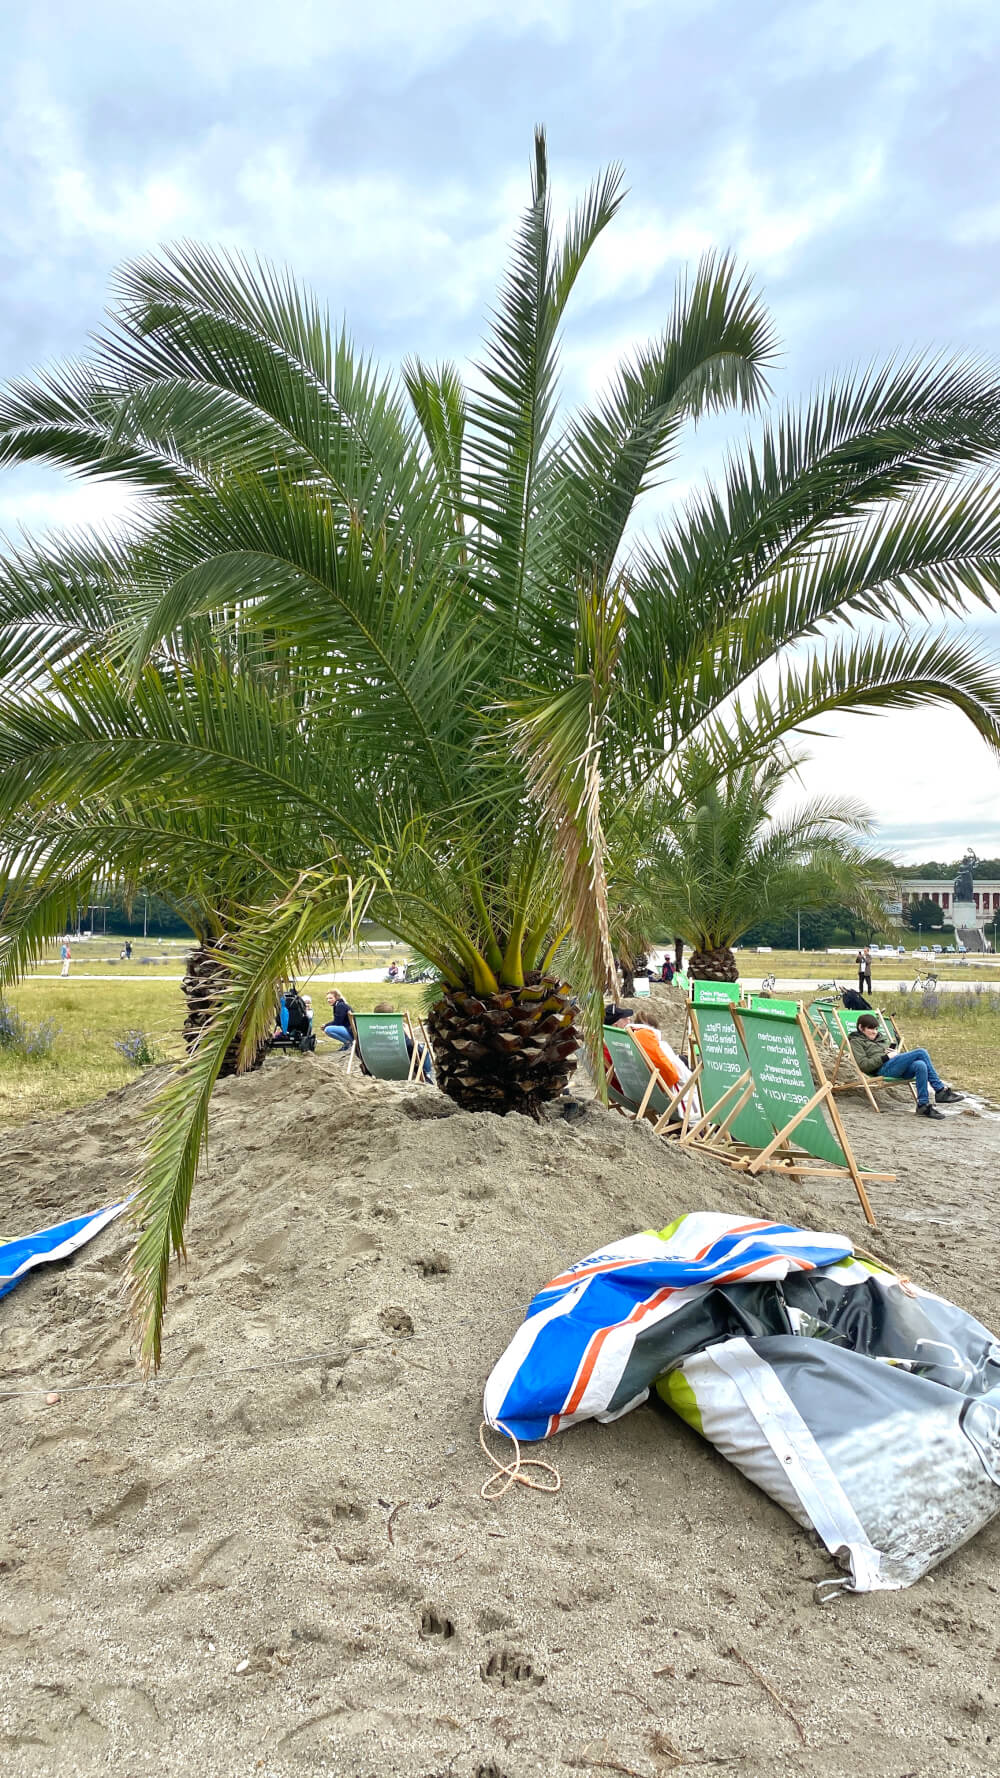 There's a New (Mini) Palm Tree Garden at Theresienwiese! Here's What It Looks Like